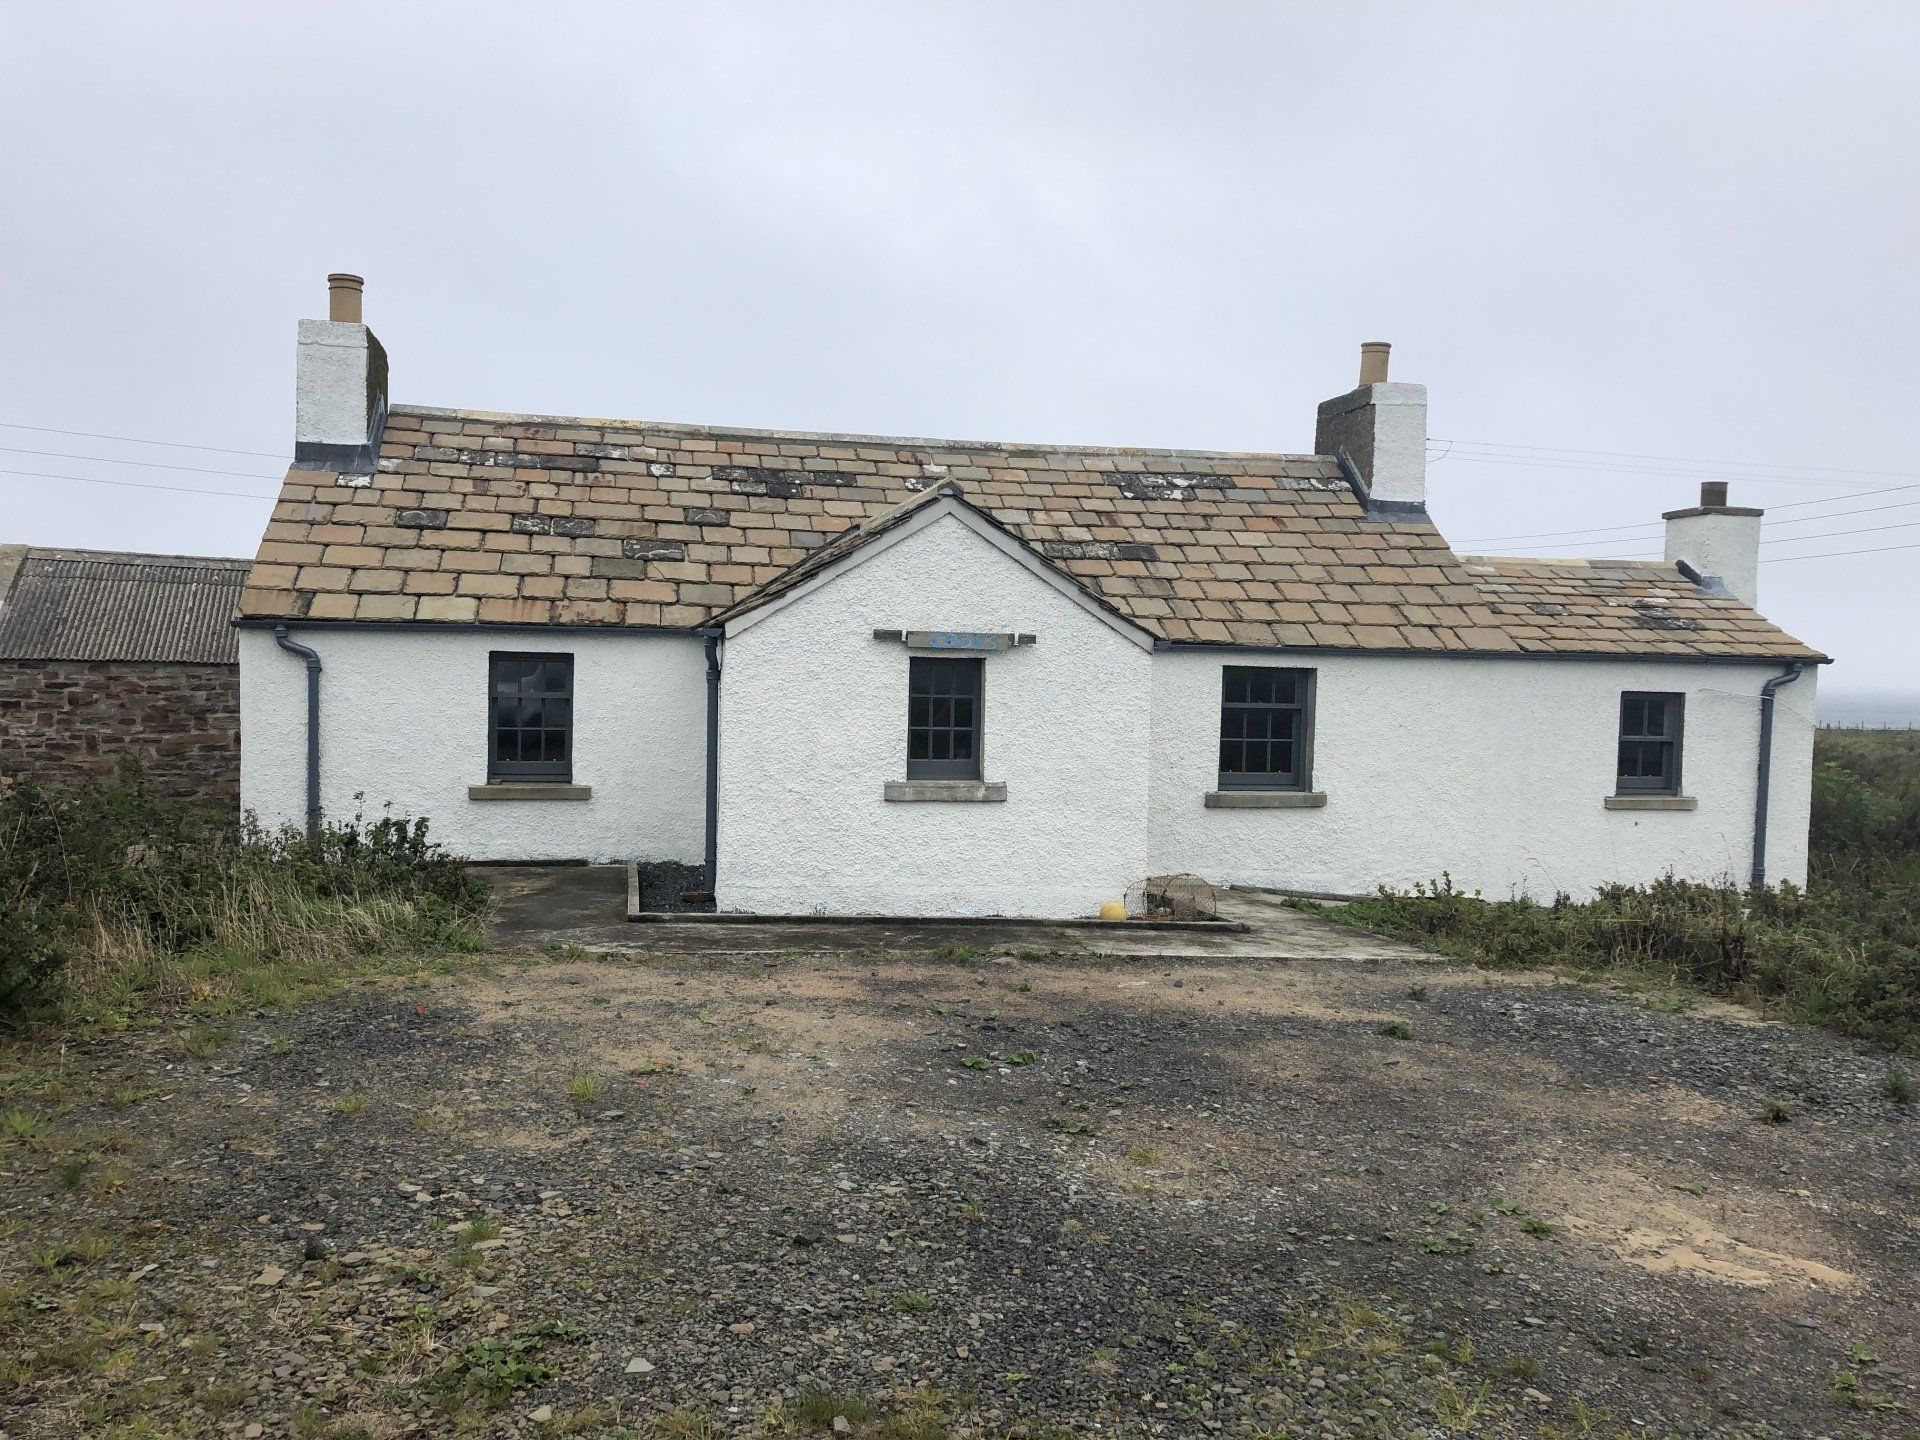 Caithness listed building using reclaimed Caithness slate for roof